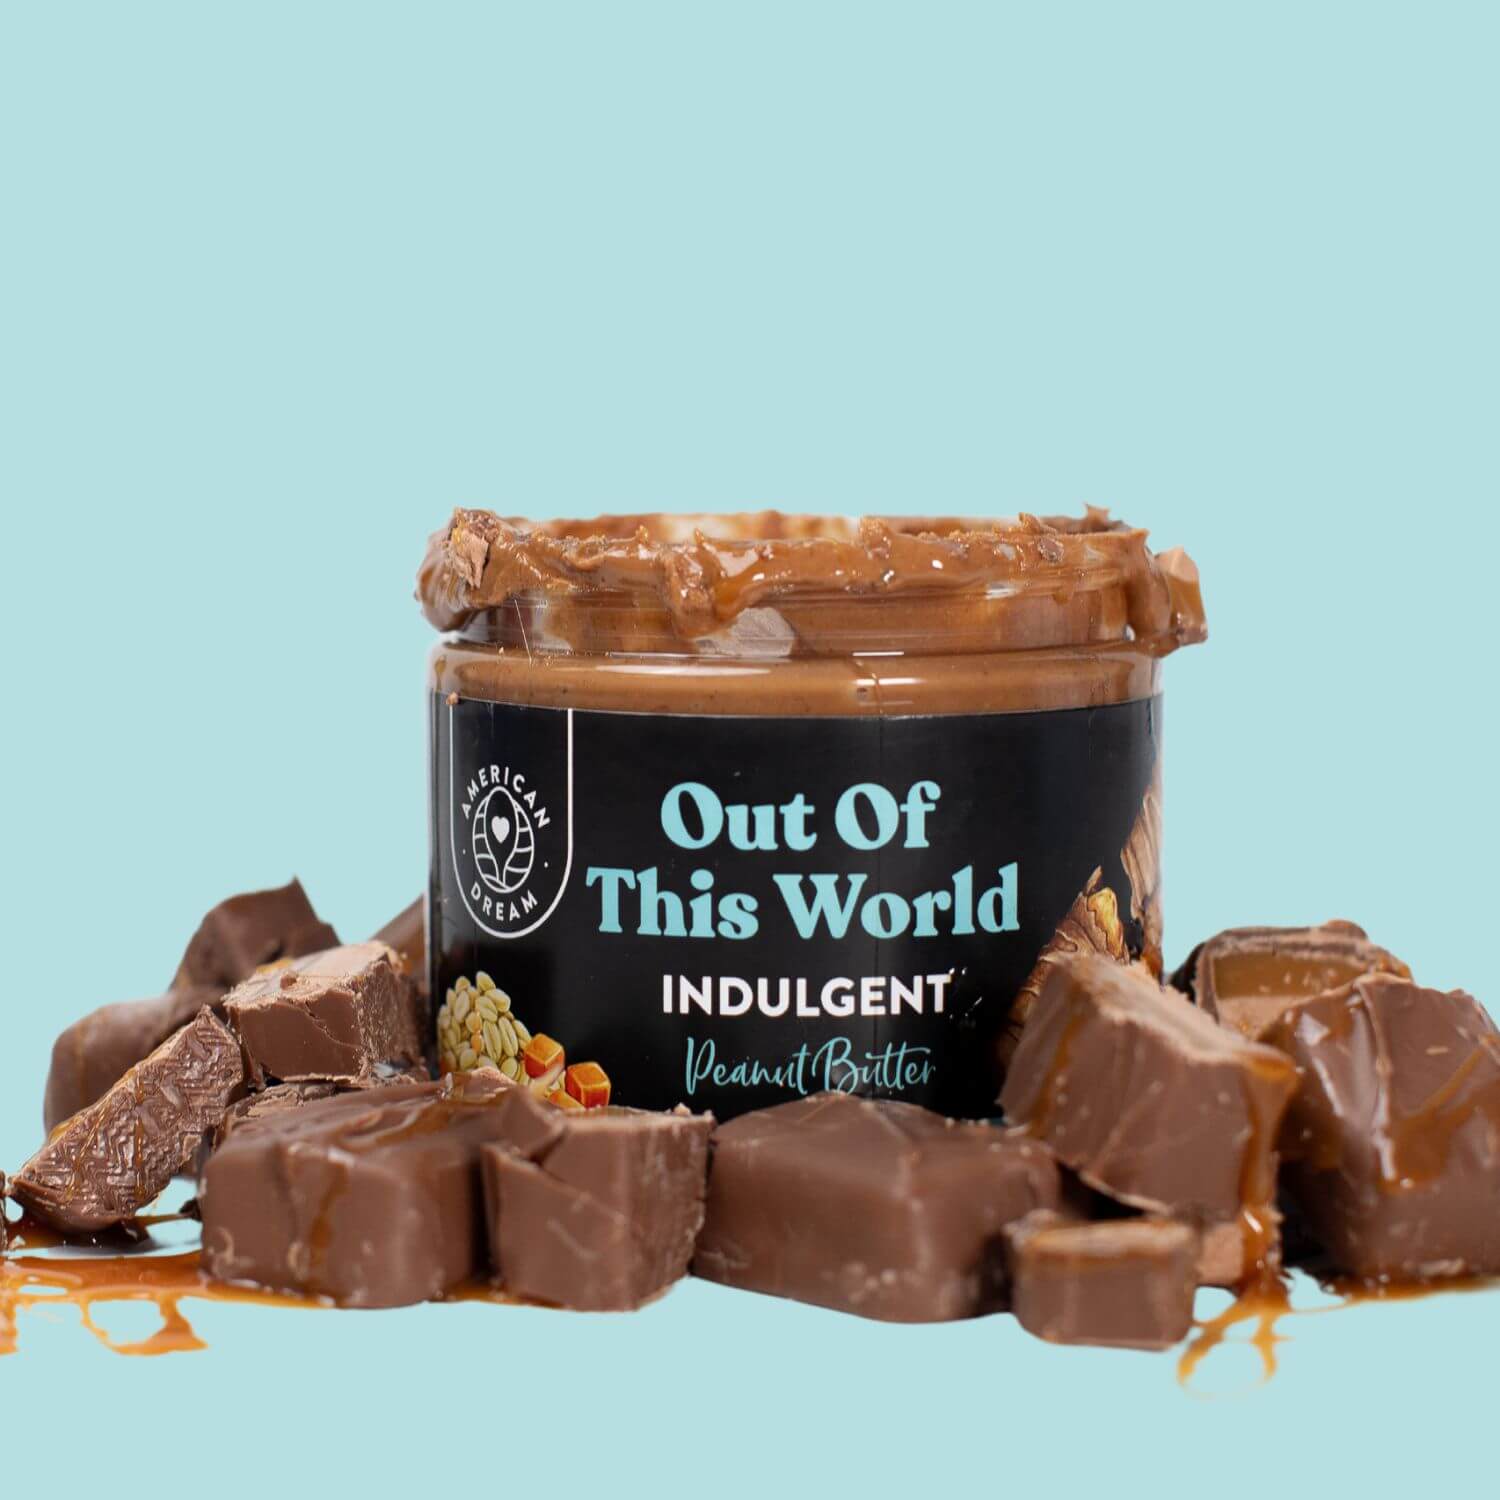 Out of This World Indulgent Peanut Butter